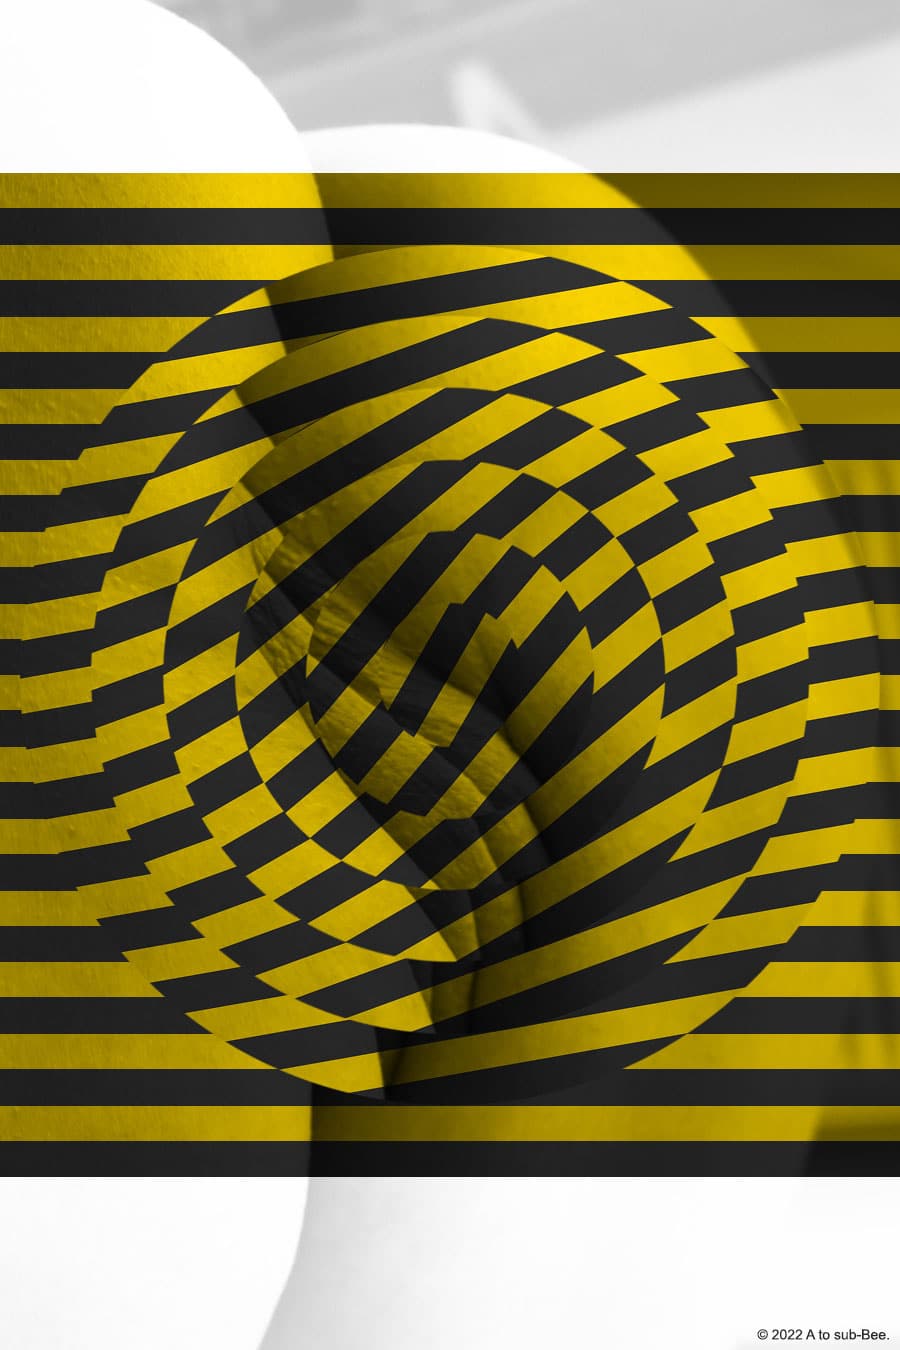 Bee's bottom with a black and yellow striped swirl rendering the image abstract